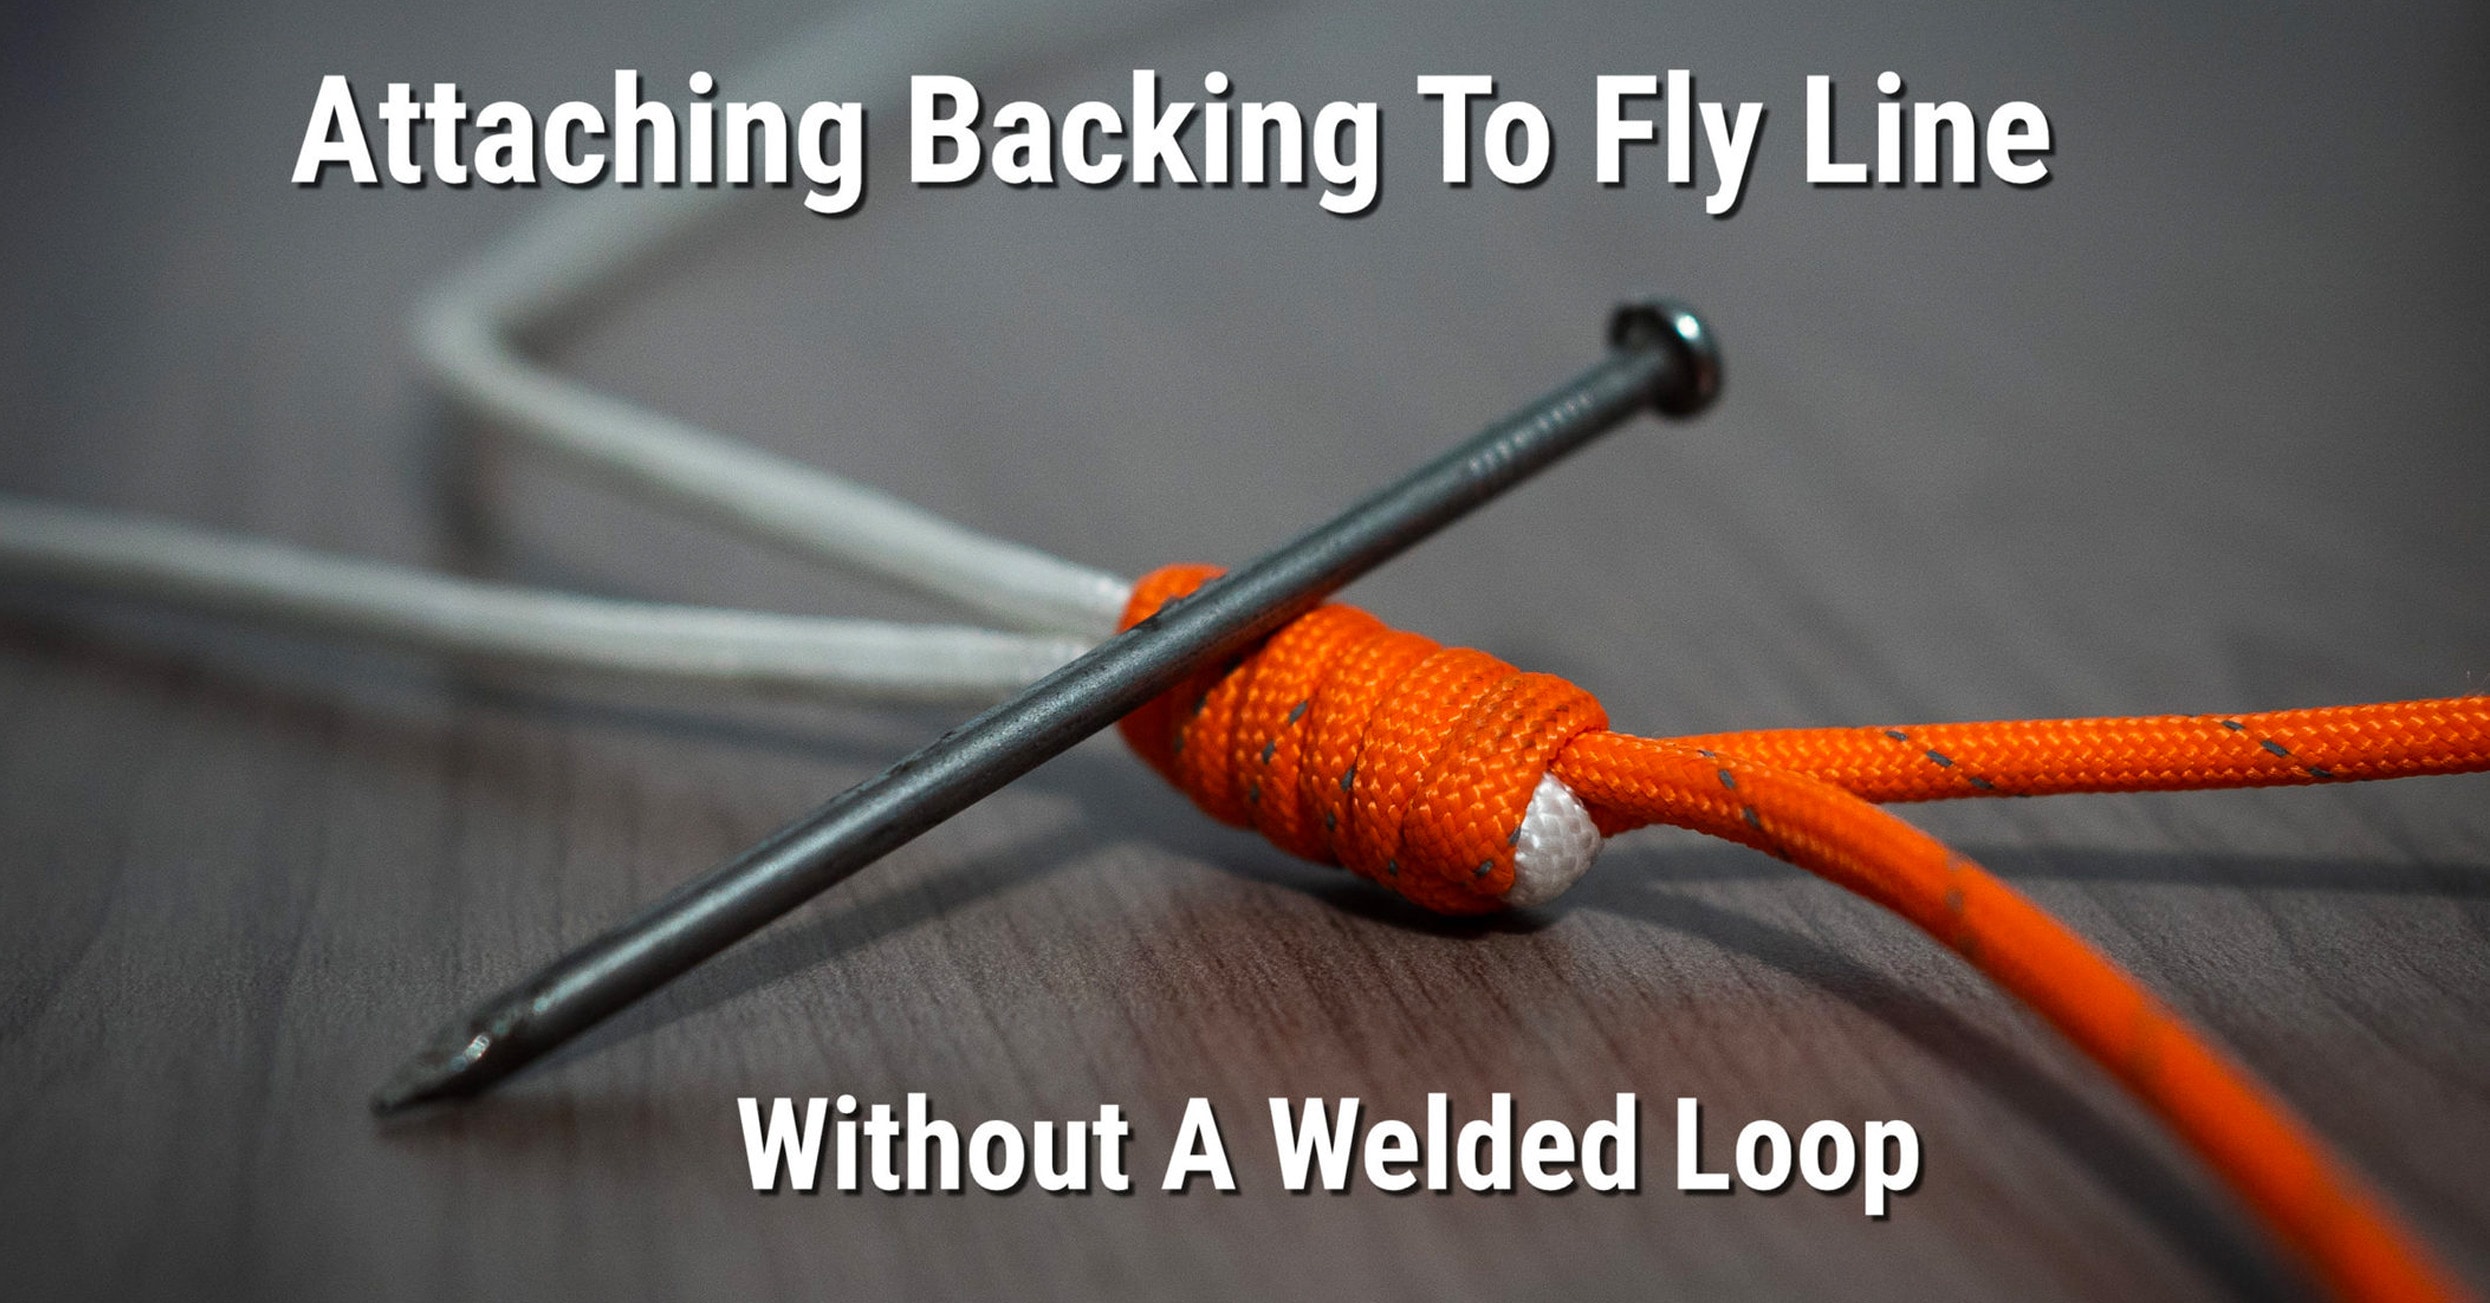 Attaching Backing To Fly Line Without A Welded Loop